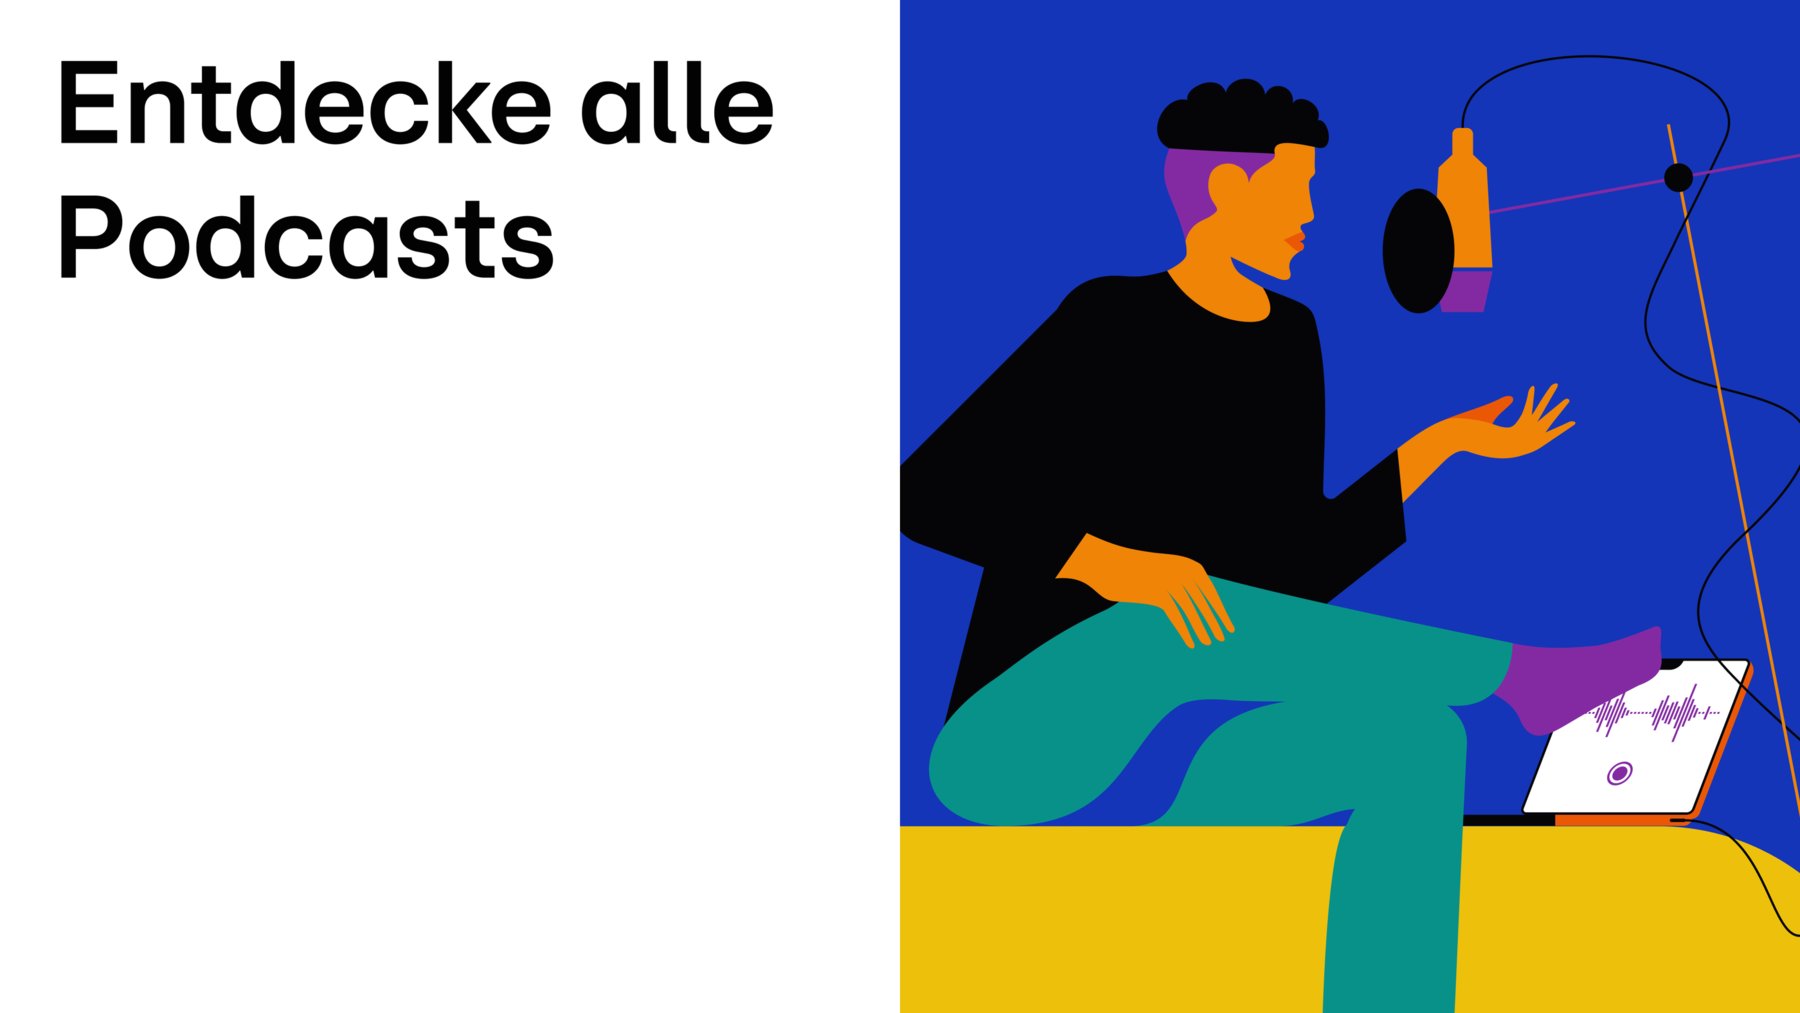 Entdecke alle Podcasts